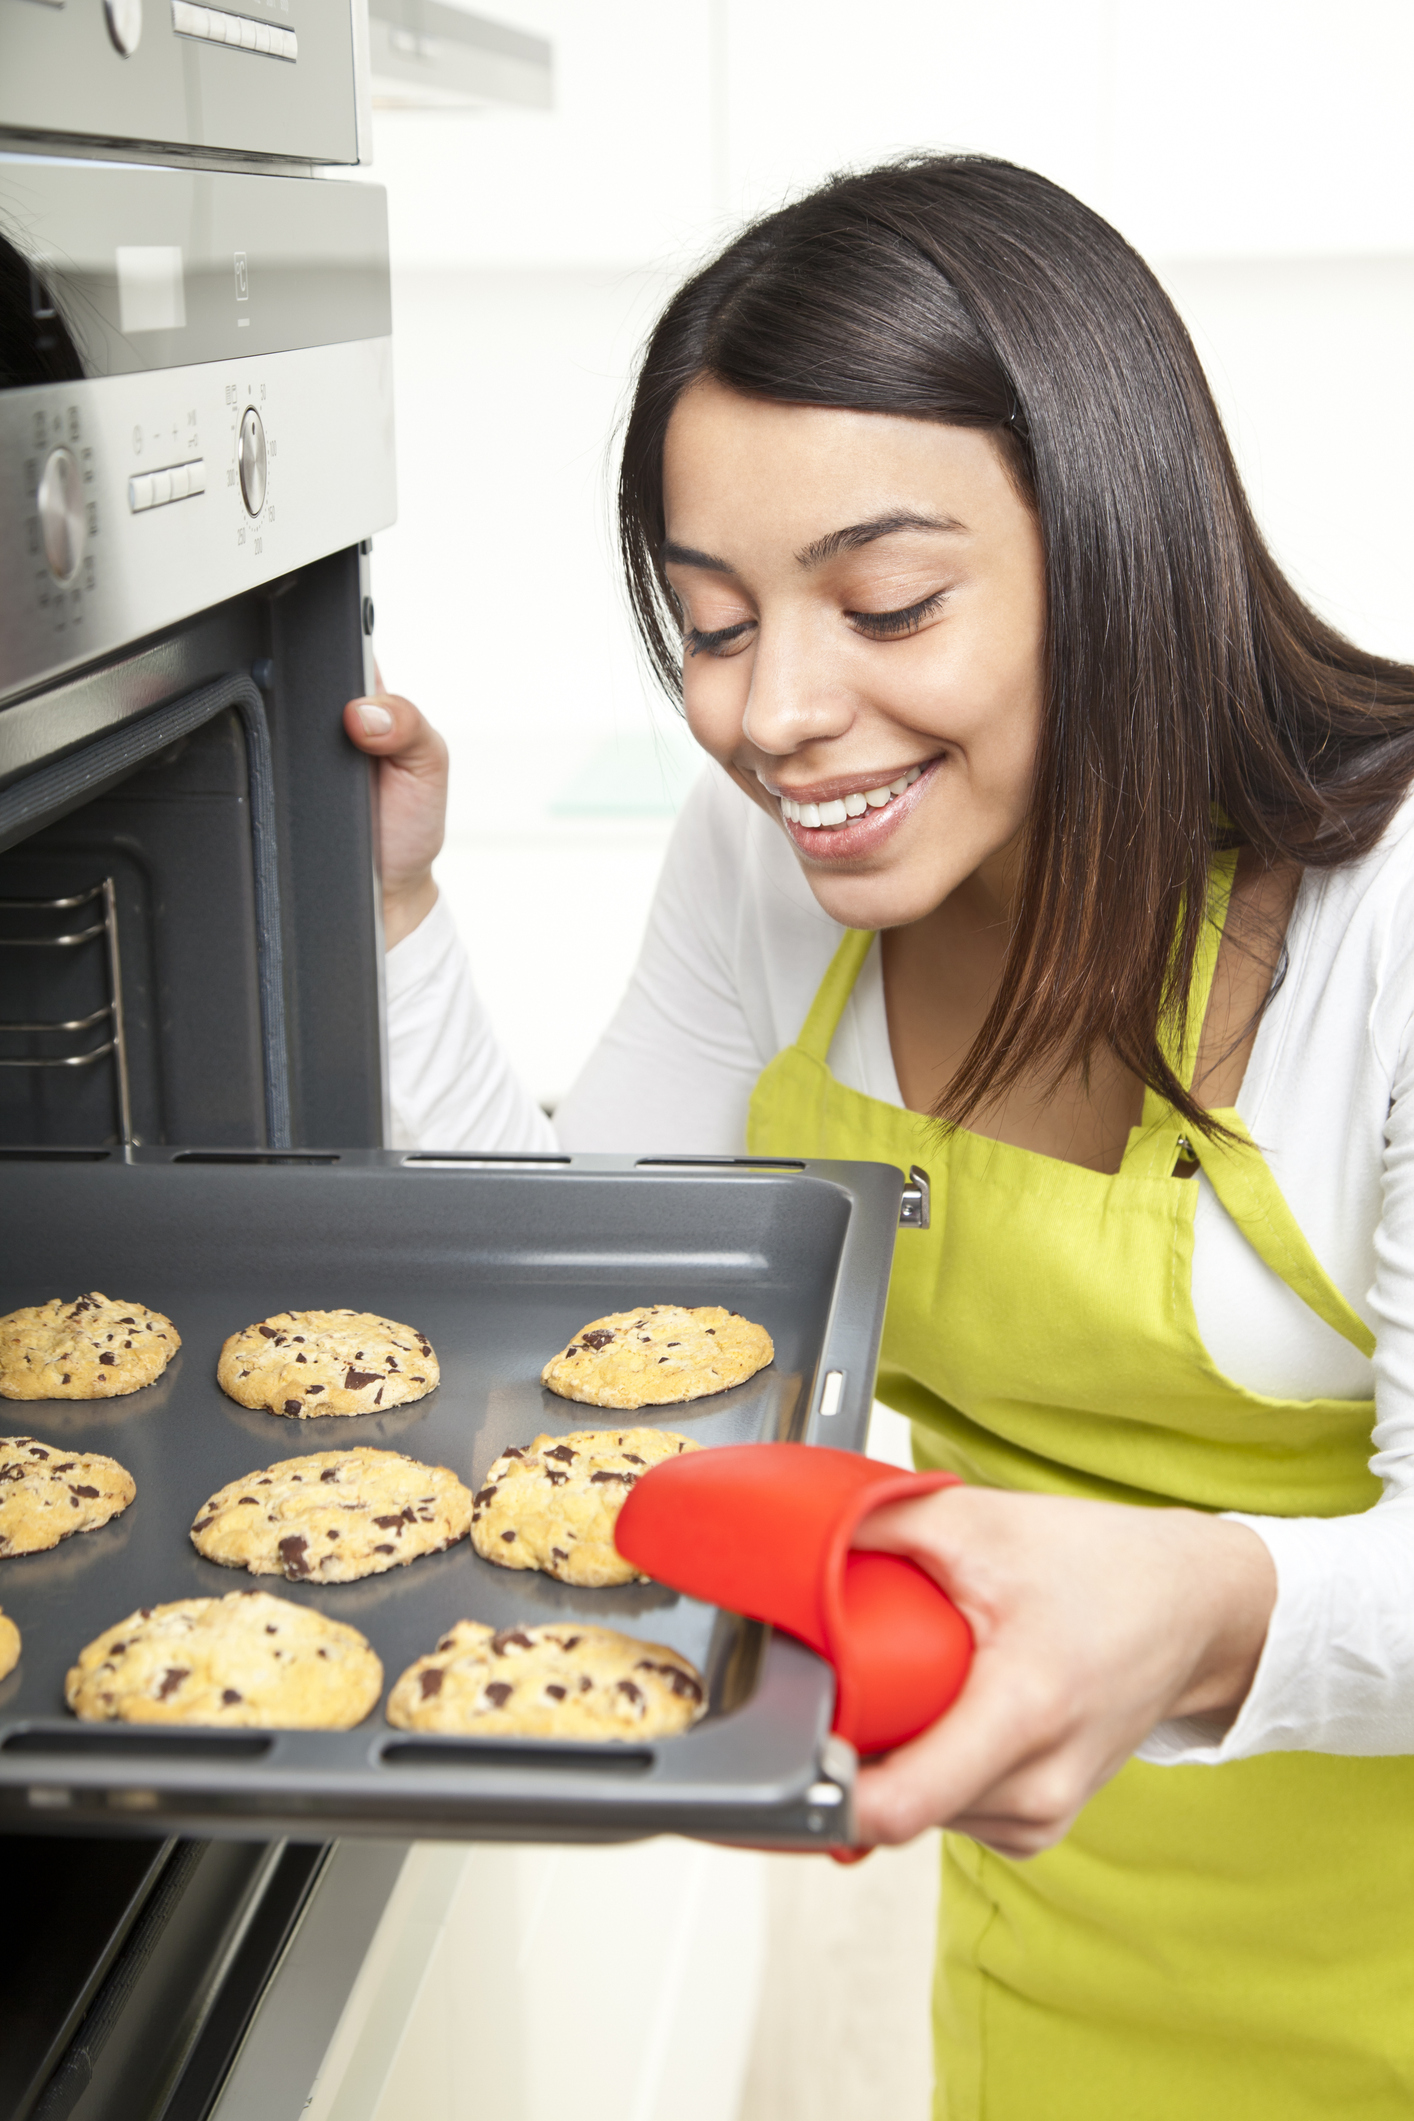 8 Reasons Why People Love Baking - News Digest | Healthy Options